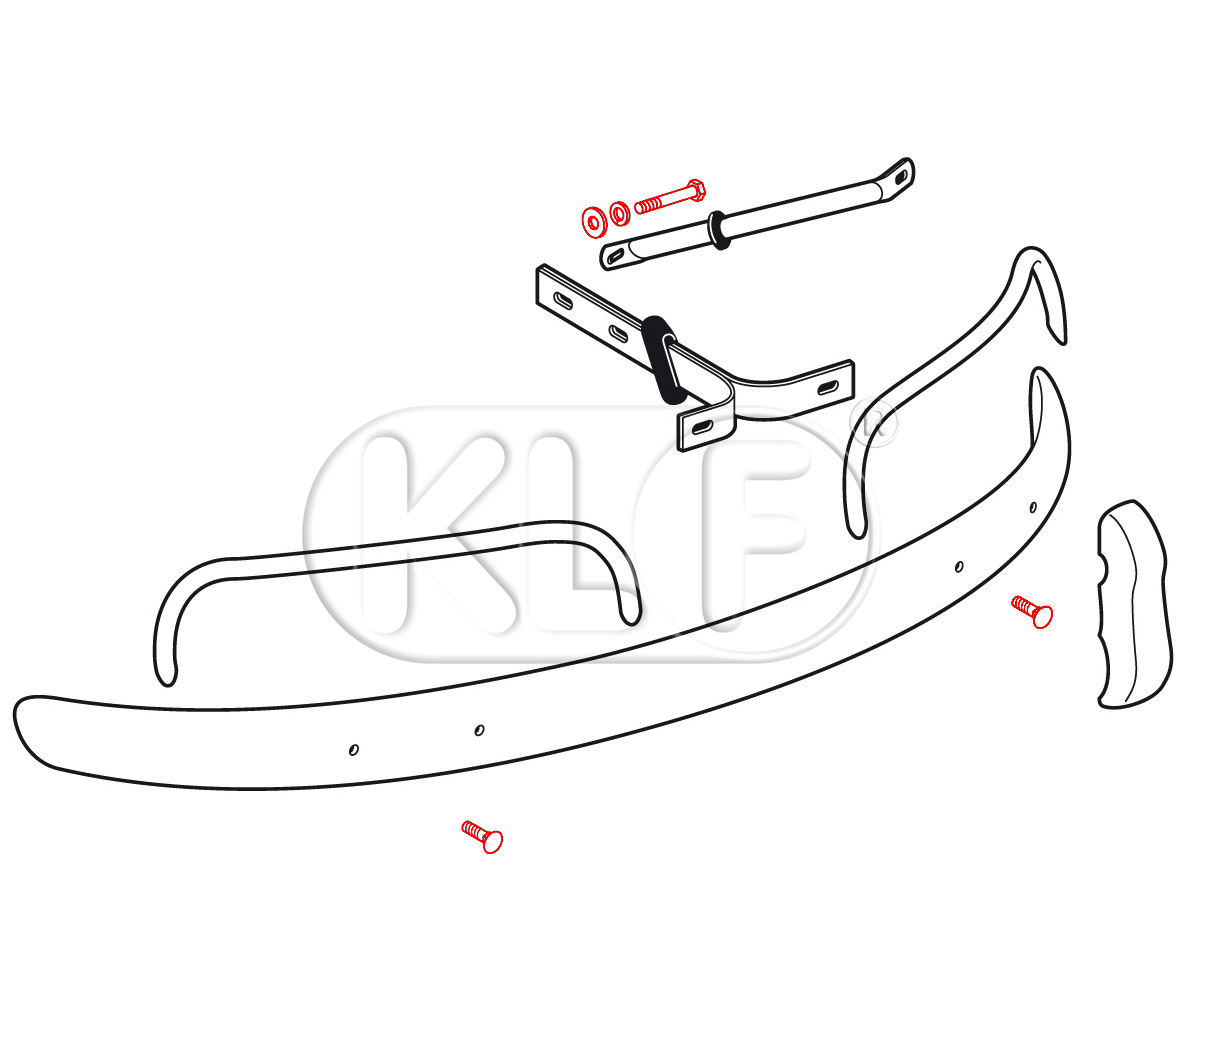 Mounting kit rear bumper (only export bumper) year 09/52 - 07/67